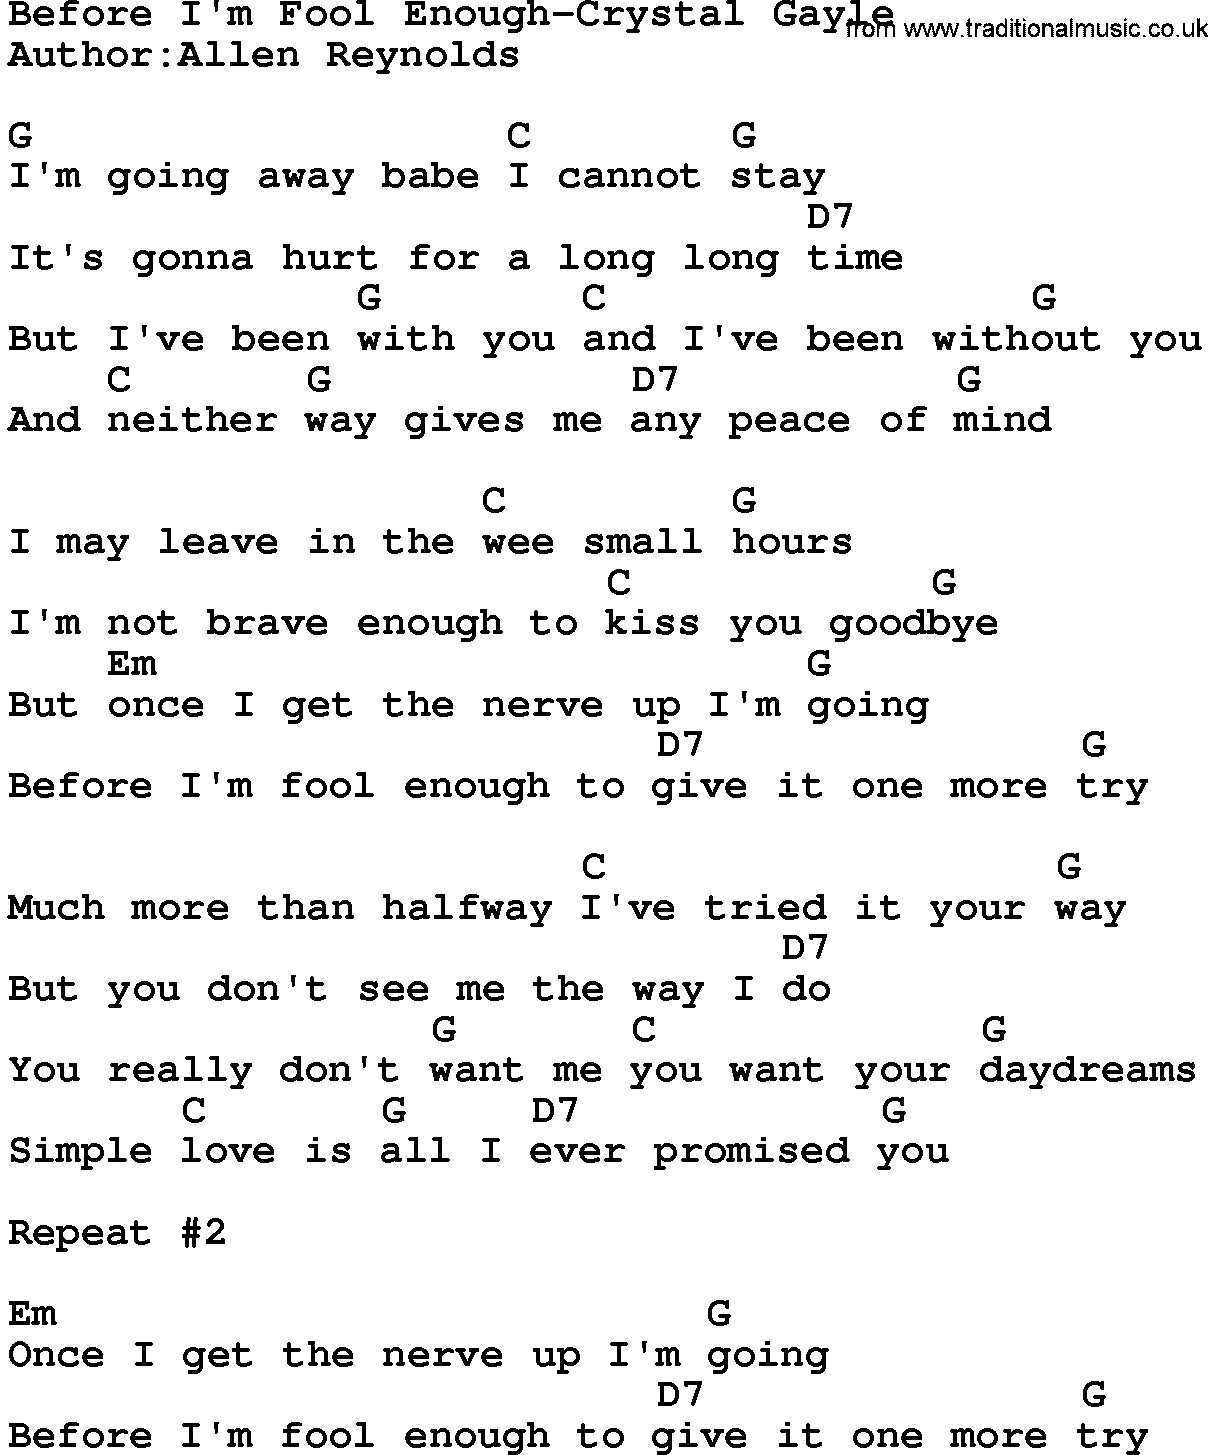 Country music song: Before I'm Fool Enough-Crystal Gayle lyrics and chords